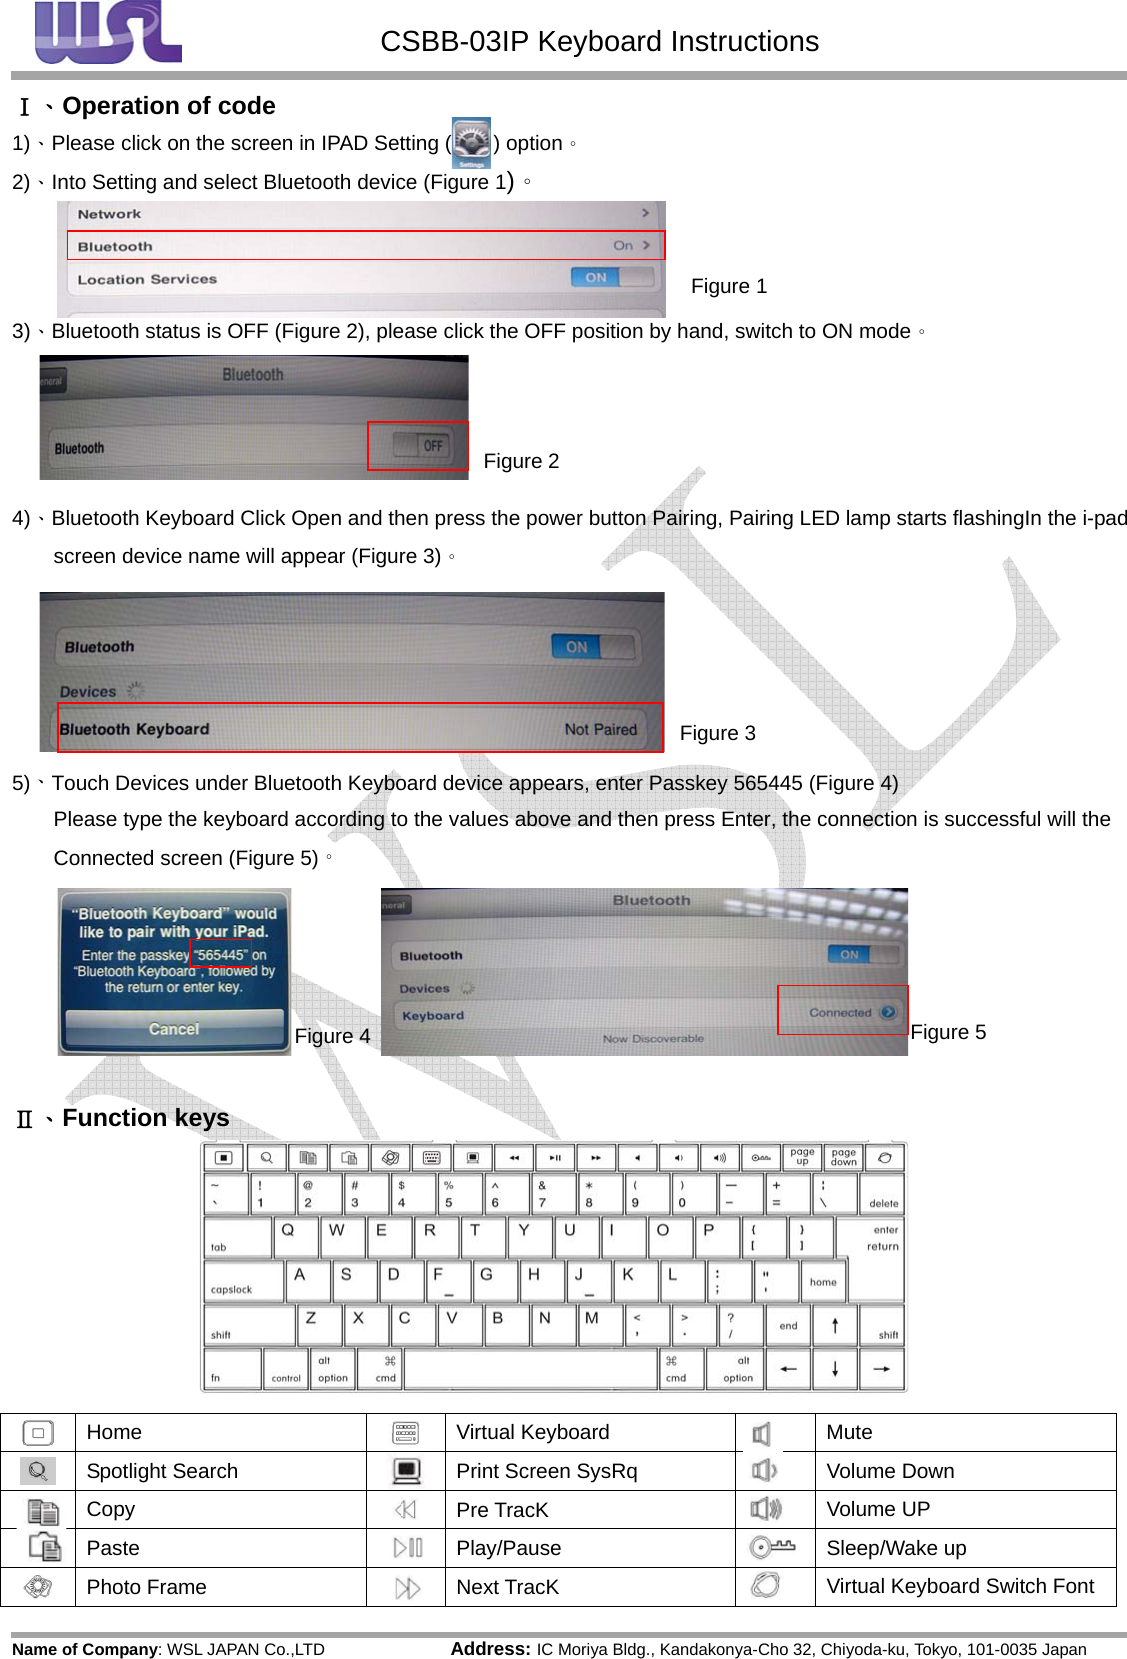  CSBB-03IP Keyboard Instructions Name of Company: WSL JAPAN Co.,LTD               Address: IC Moriya Bldg., Kandakonya-Cho 32, Chiyoda-ku, Tokyo, 101-0035 JapanⅠ、Operation of code 1)、Please click on the screen in IPAD Setting (        ) option。 2)、Into Setting and select Bluetooth device (Figure 1)。    3)、Bluetooth status is OFF (Figure 2), please click the OFF position by hand, switch to ON mode。     4)、Bluetooth Keyboard Click Open and then press the power button Pairing, Pairing LED lamp starts flashingIn the i-pad screen device name will appear (Figure 3)。        5)、Touch Devices under Bluetooth Keyboard device appears, enter Passkey 565445 (Figure 4) Please type the keyboard according to the values above and then press Enter, the connection is successful will the Connected screen (Figure 5)。      Ⅱ、Function keys  Home   Virtual Keyboard    Mute Spotlight Search   Print Screen SysRq  Volume Down Copy   Pre TracK  Volume UP Paste  Play/Pause Sleep/Wake up Photo Frame    Next TracK  Virtual Keyboard Switch Font Figure 1Figure 2Figure 3Figure 4Figure 5